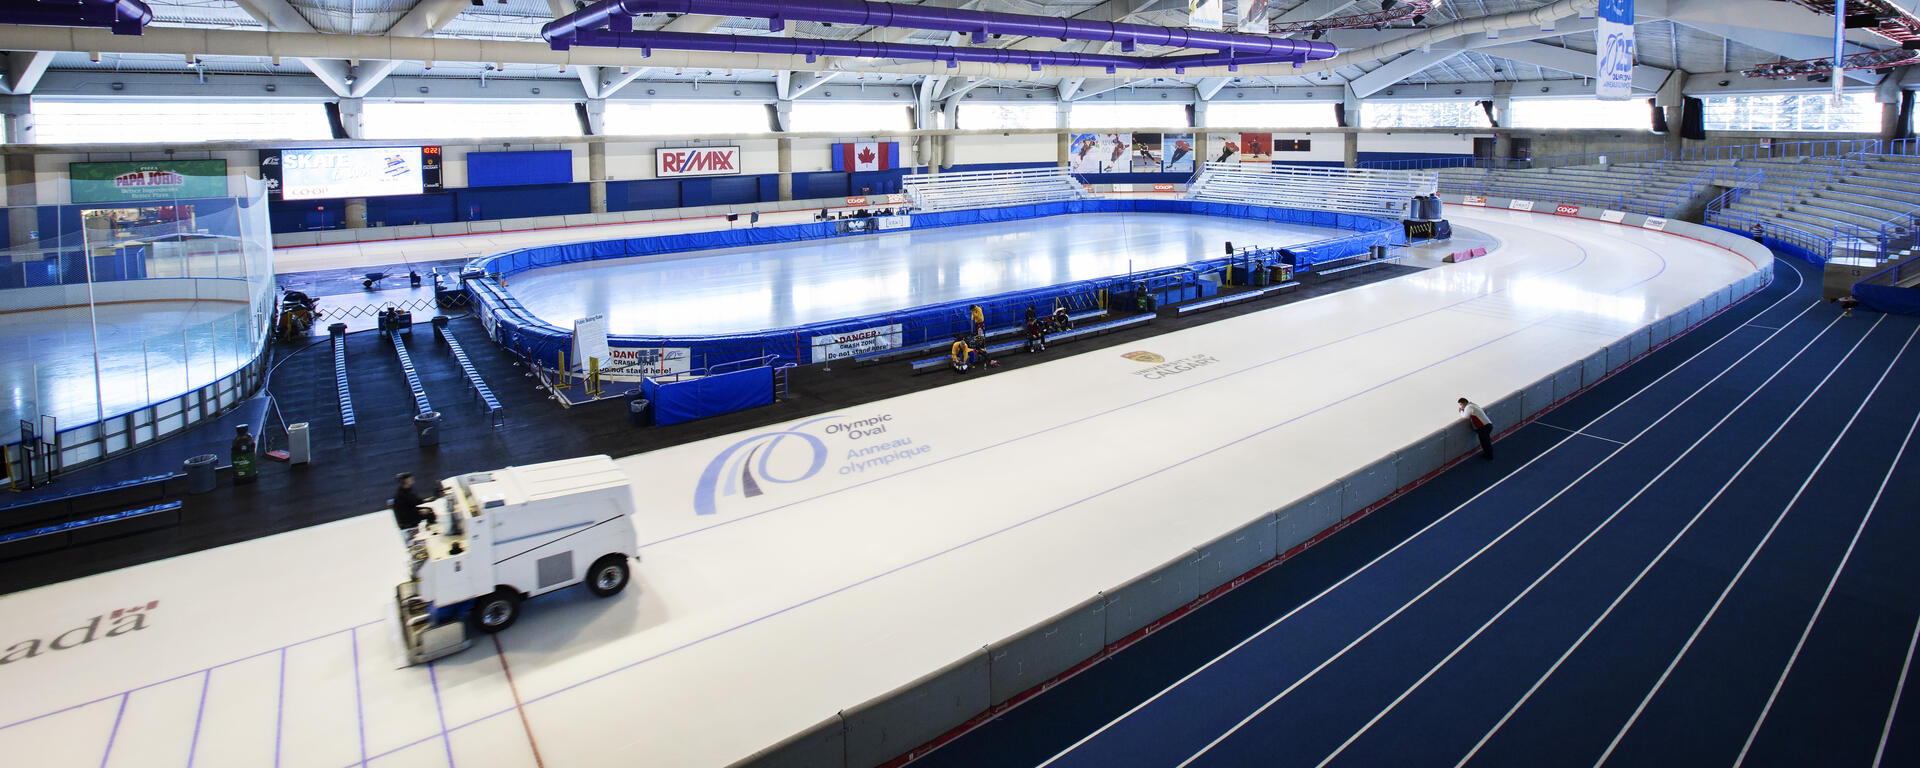 the olympic oval ice rink